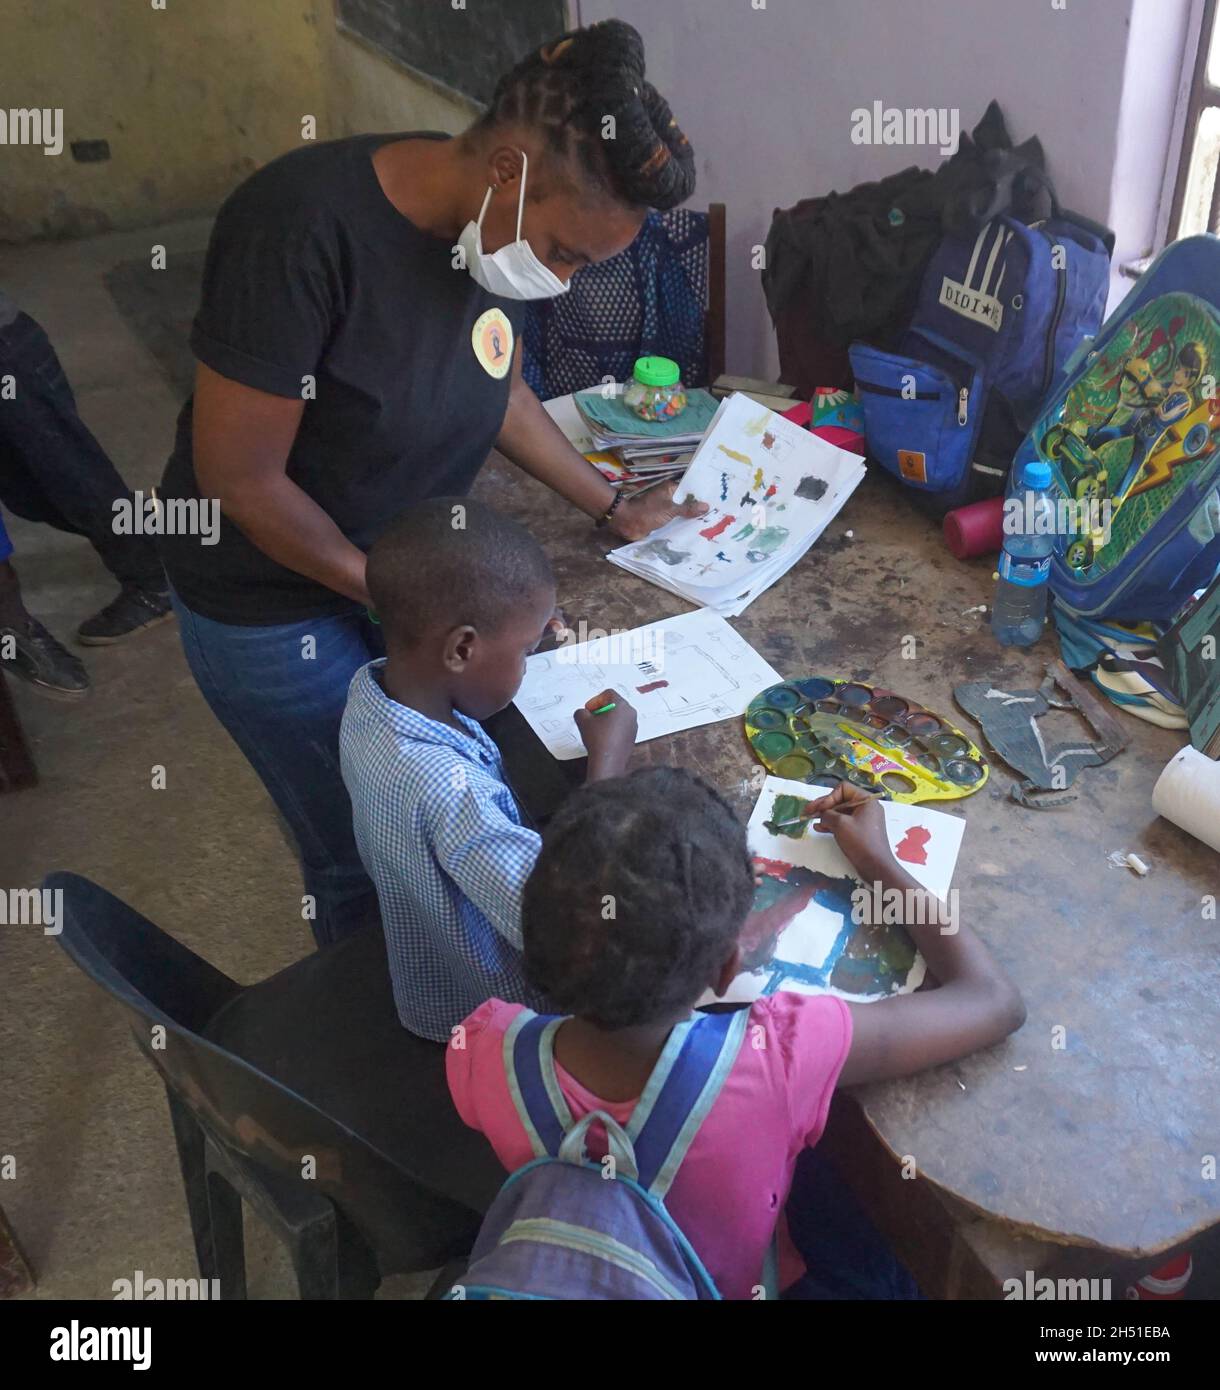 (211105) -- LUSAKA, Nov. 5, 2021 (Xinhua) -- A teacher instructs children to draw pictures at Orphan's Cry School in Lusaka, Zambia, on Oct. 29, 2021. Studies indicate that art improves communication and concentration. It also helps reduce feelings of isolation and increase an individual's confidence and self-awareness. It is against this backdrop that Nkhani Zanga, a Zambian-based charity, has been providing resources for children from less privileged backgrounds to enable them to explore and exploit their artistic potential in the area of music, poetry, drama and painting among others. (Phot Stock Photo